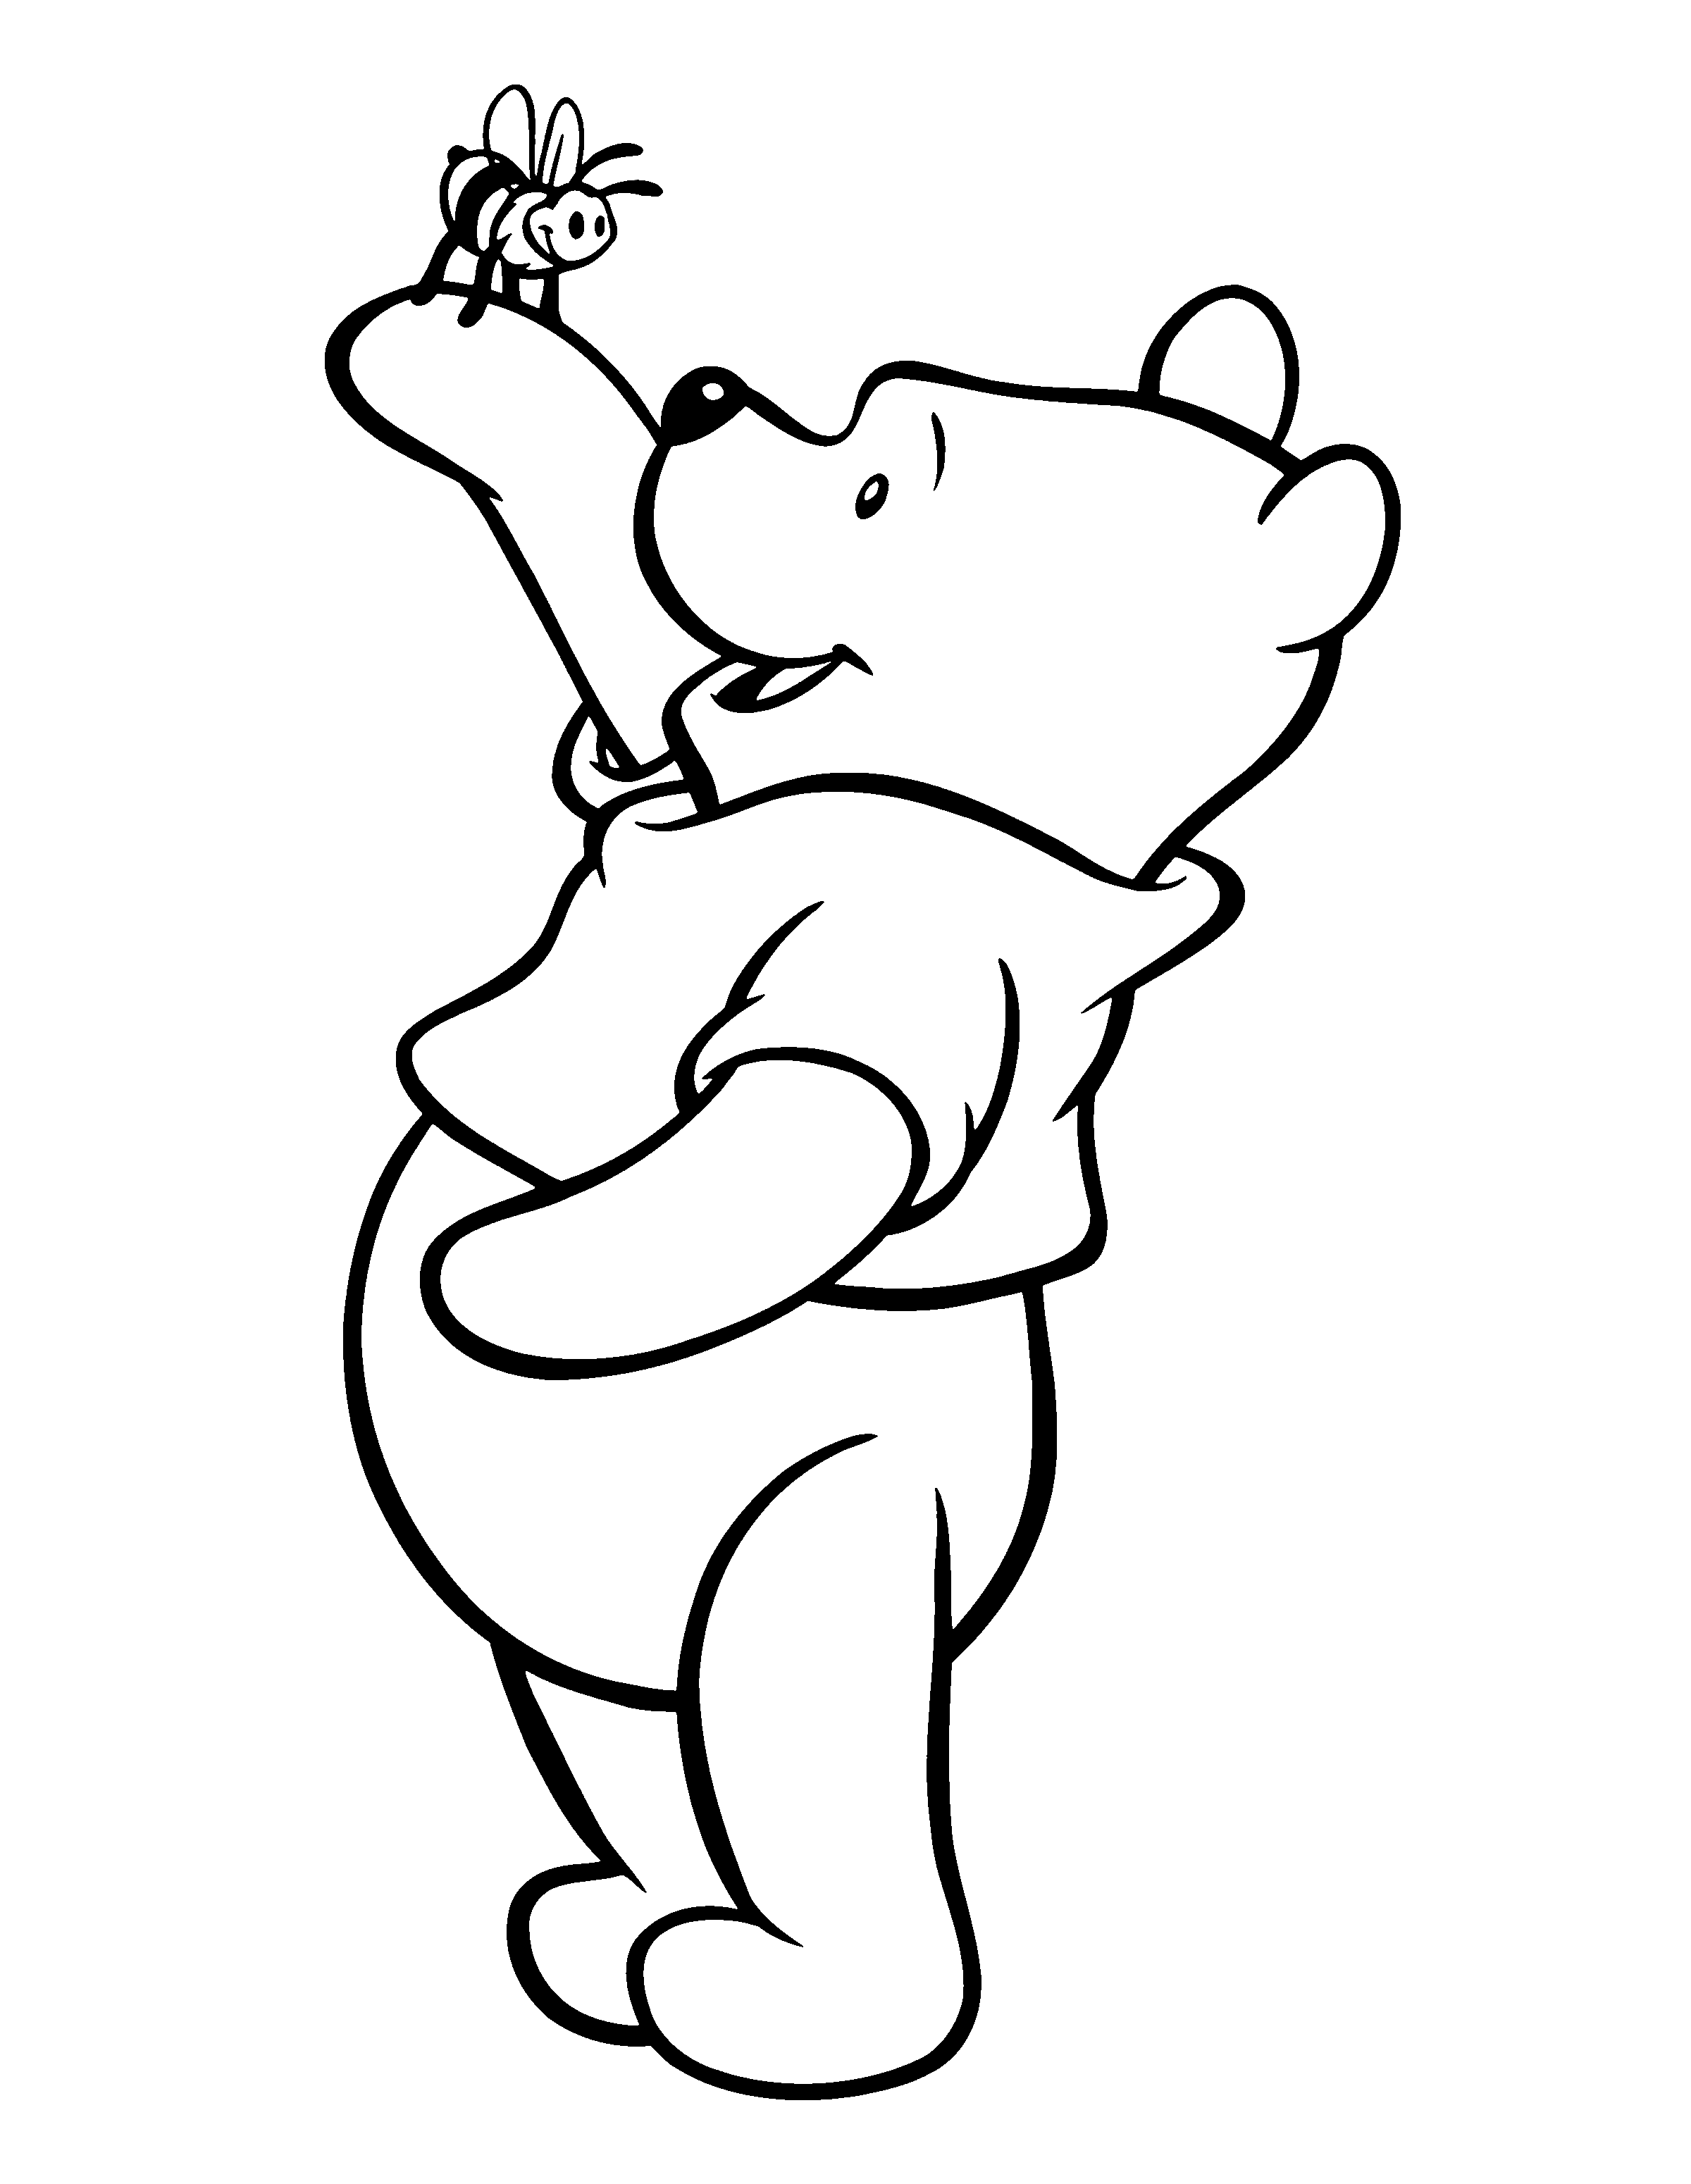 Winnie The Pooh Black And White - Coloring Pages for Kids and for ...